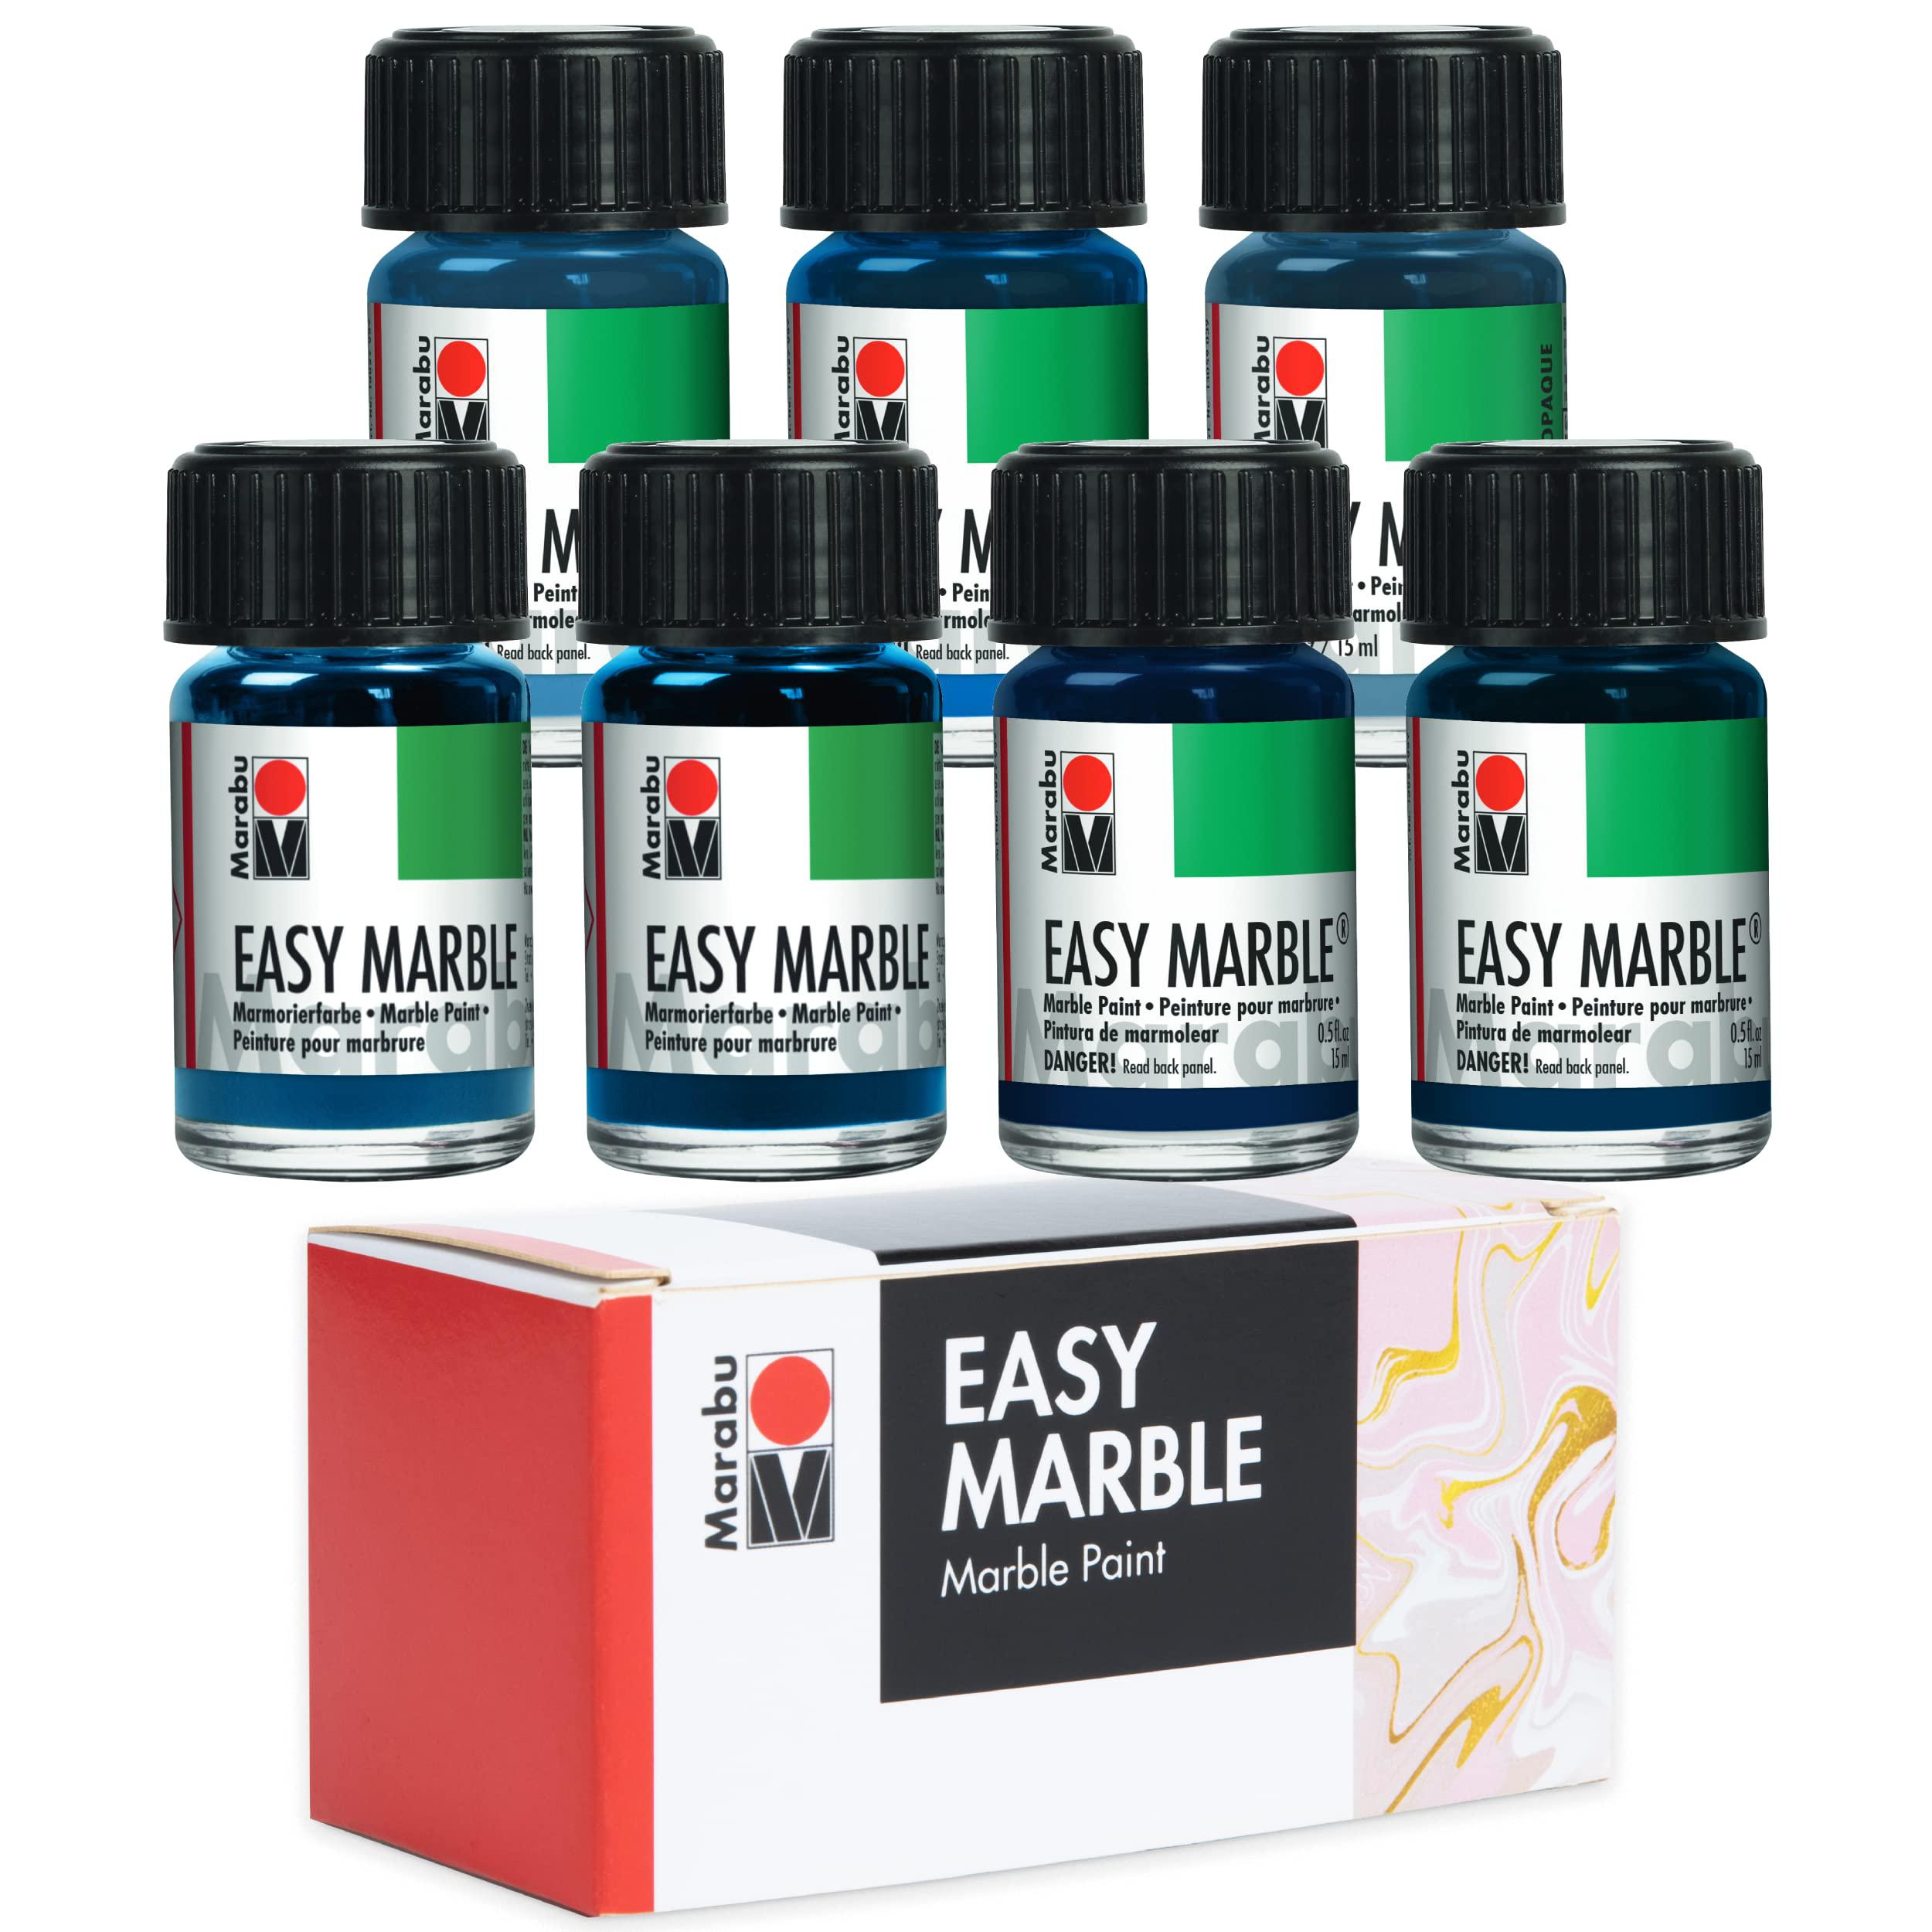 Marabu marabu easy marble paint set - blue colors - marbling paint kit for  kids and adults - water art kit for hydro dipping, tumble